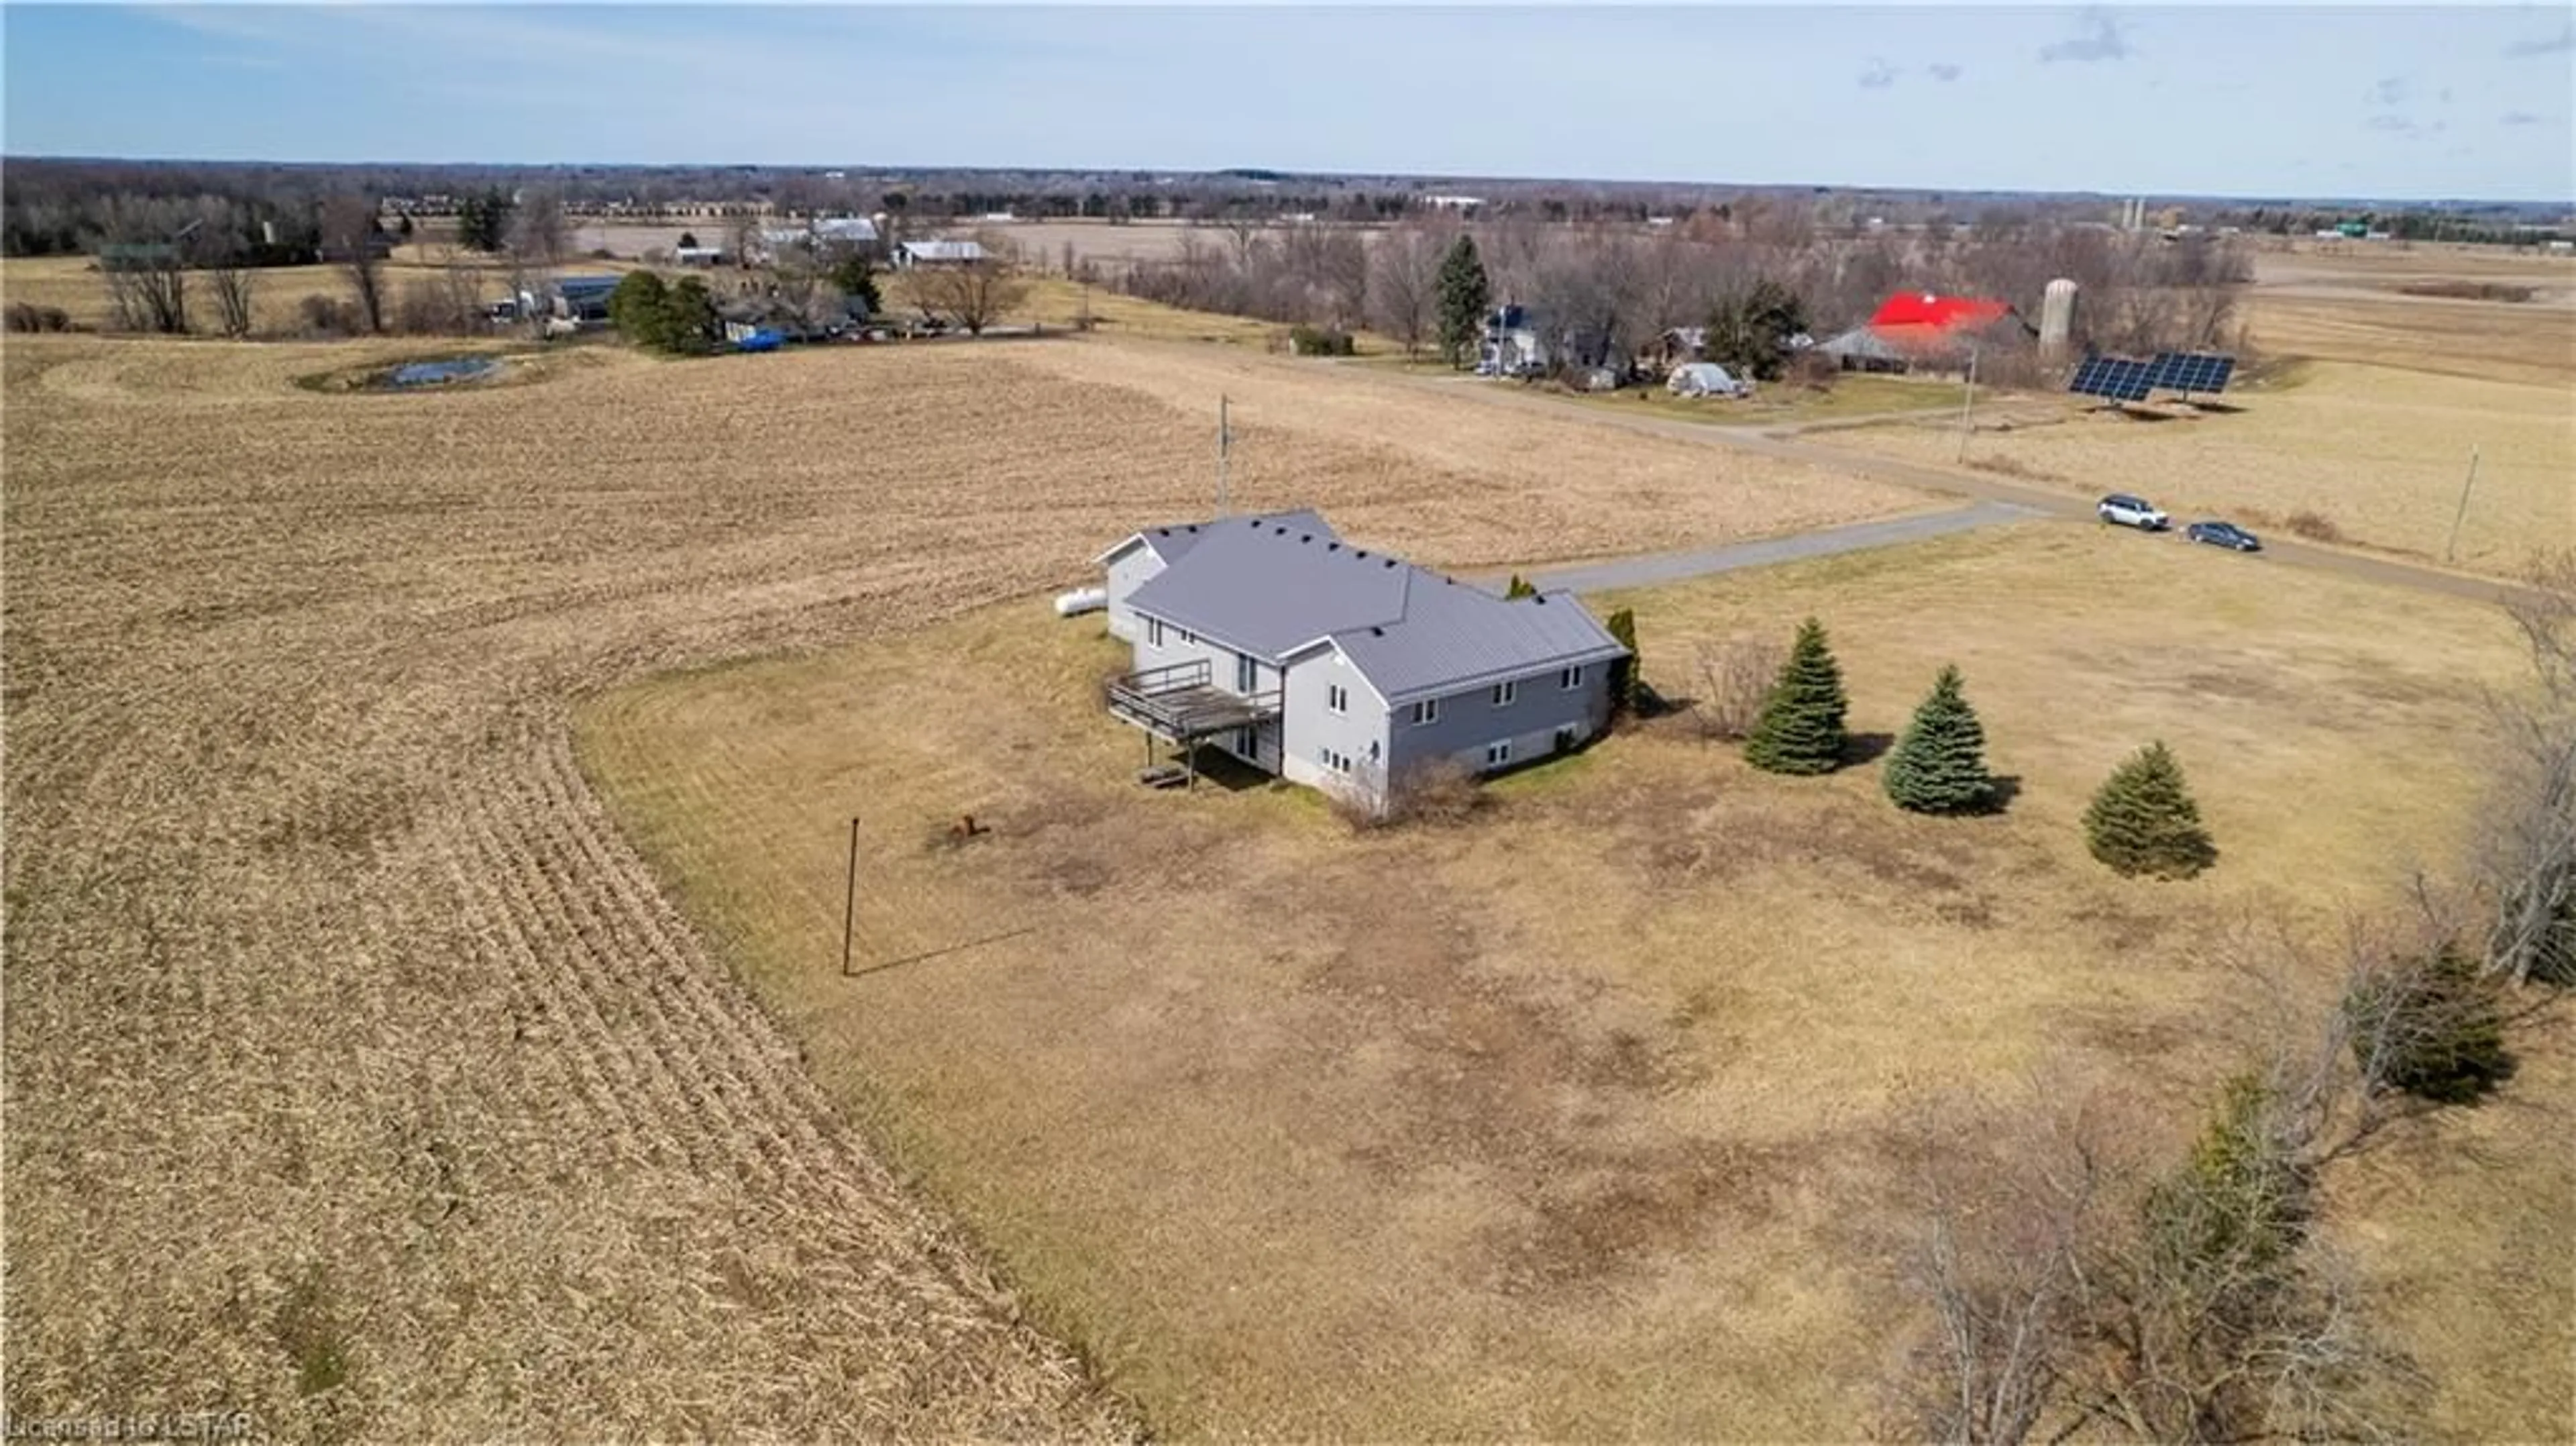 Fenced yard for 786660 Township Road 6, Drumbo Ontario N0J 1G0